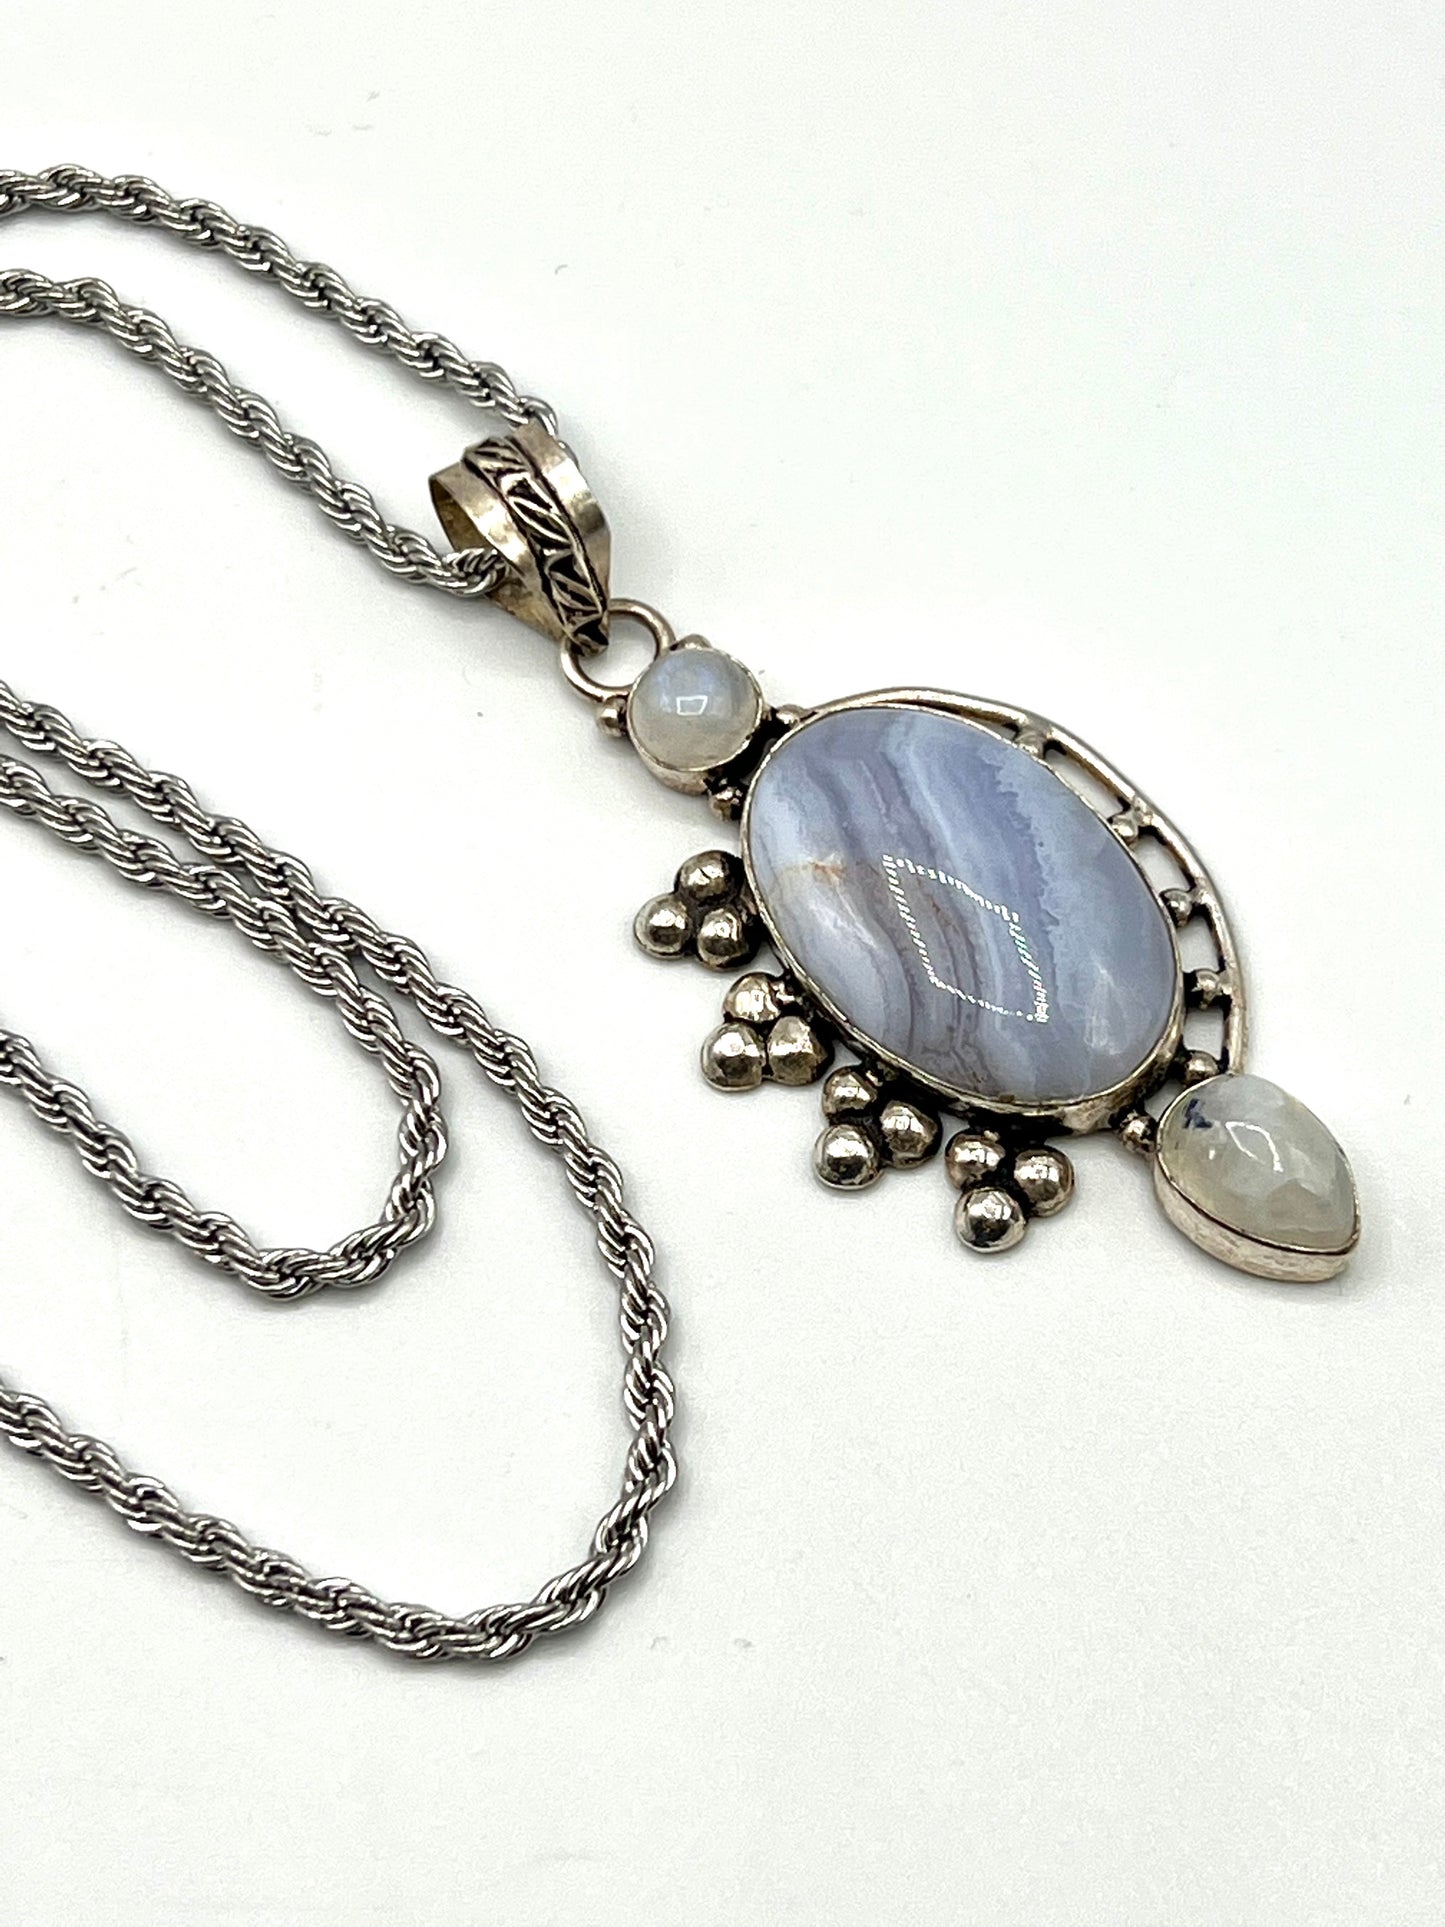 Blue Lace Agate  Sterling Silver Necklace large Pendant Charm Oval Women Or Men with Rope cahin